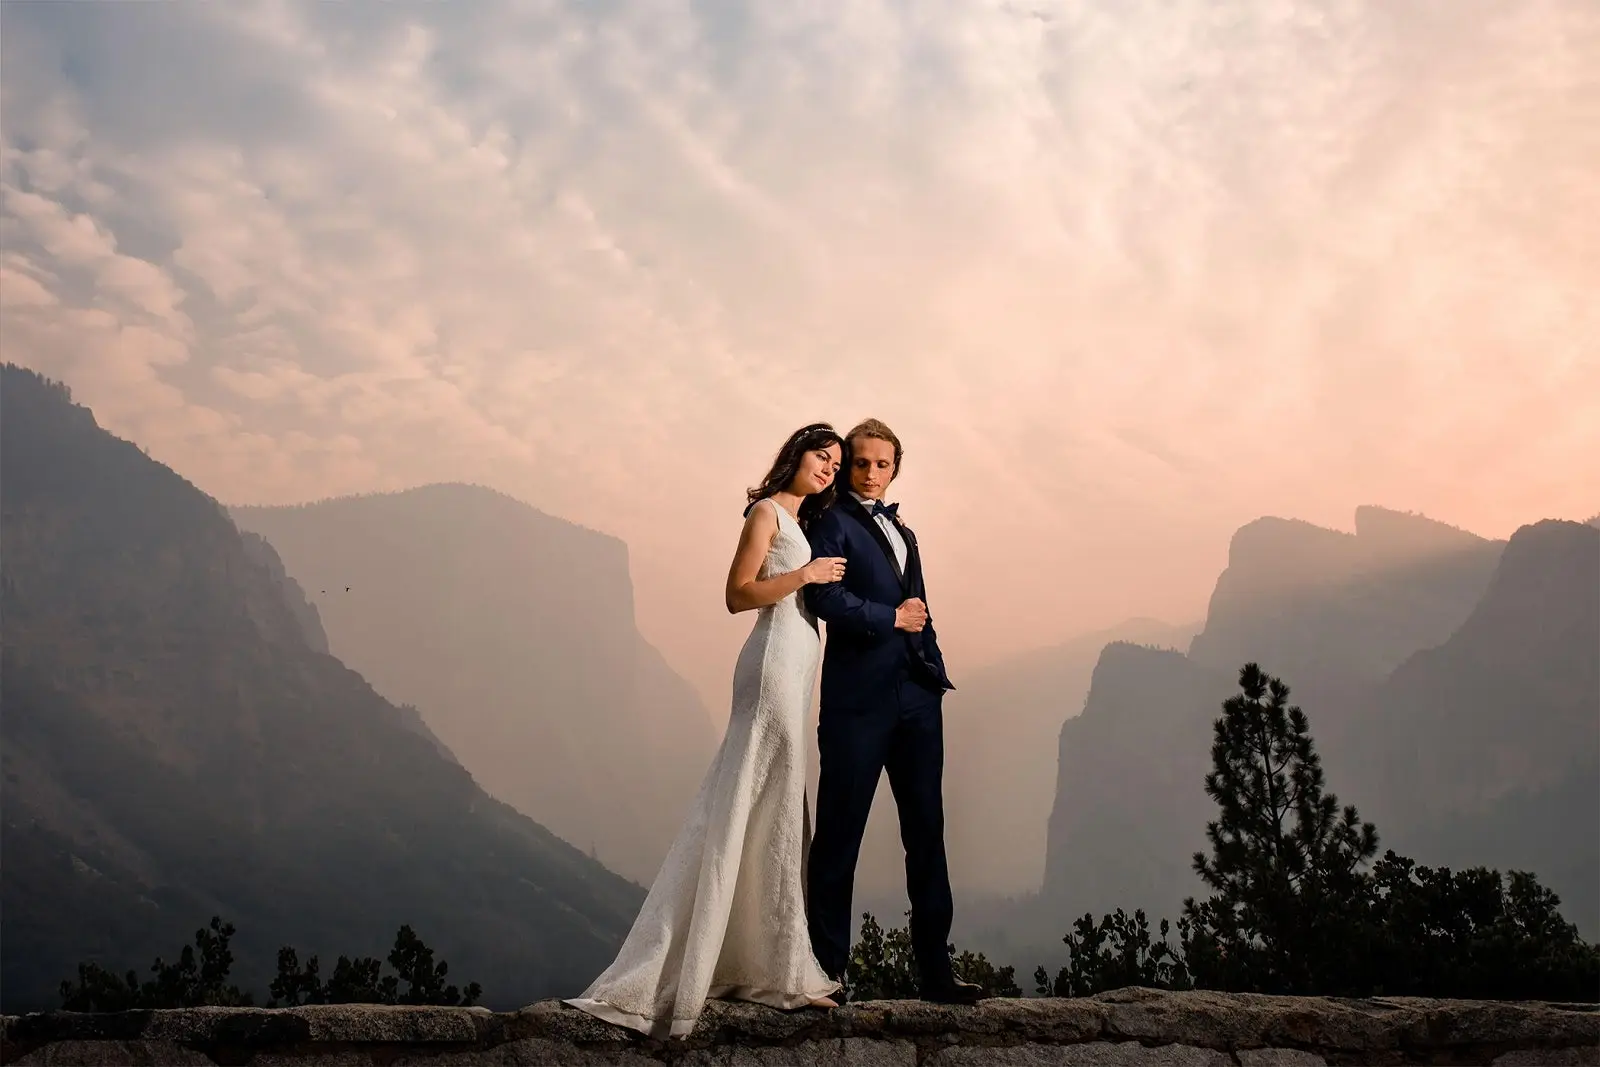 Edited version of bride and groom standing in front of mountain range. 